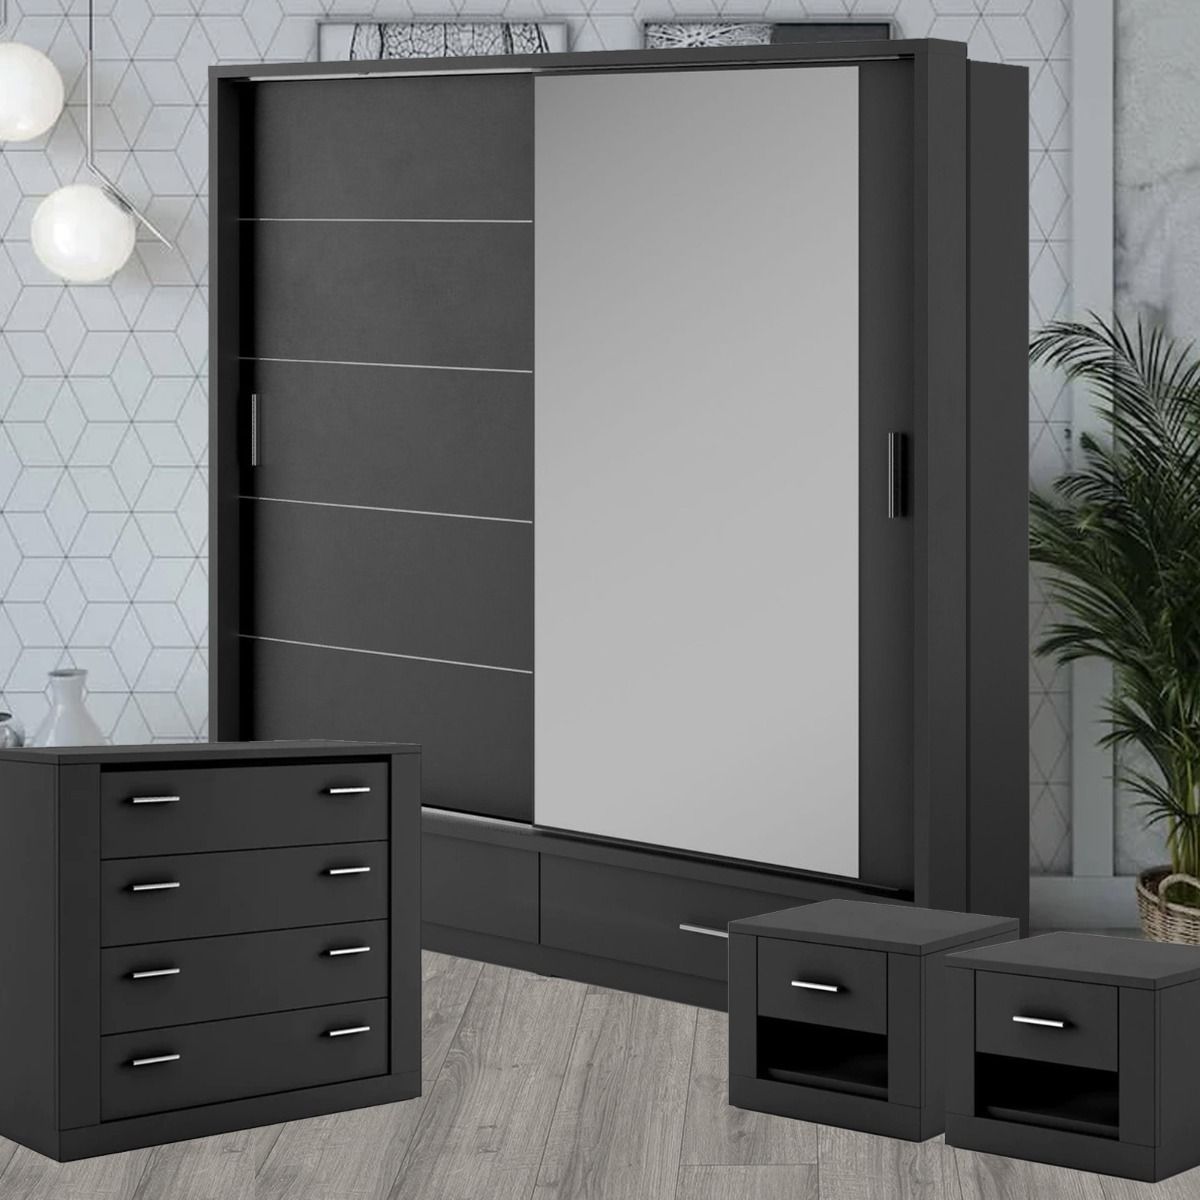 Bedroom Furniture Sets On Sale | Wardrobe Direct™ Throughout Black And White Wardrobes Set (View 9 of 15)